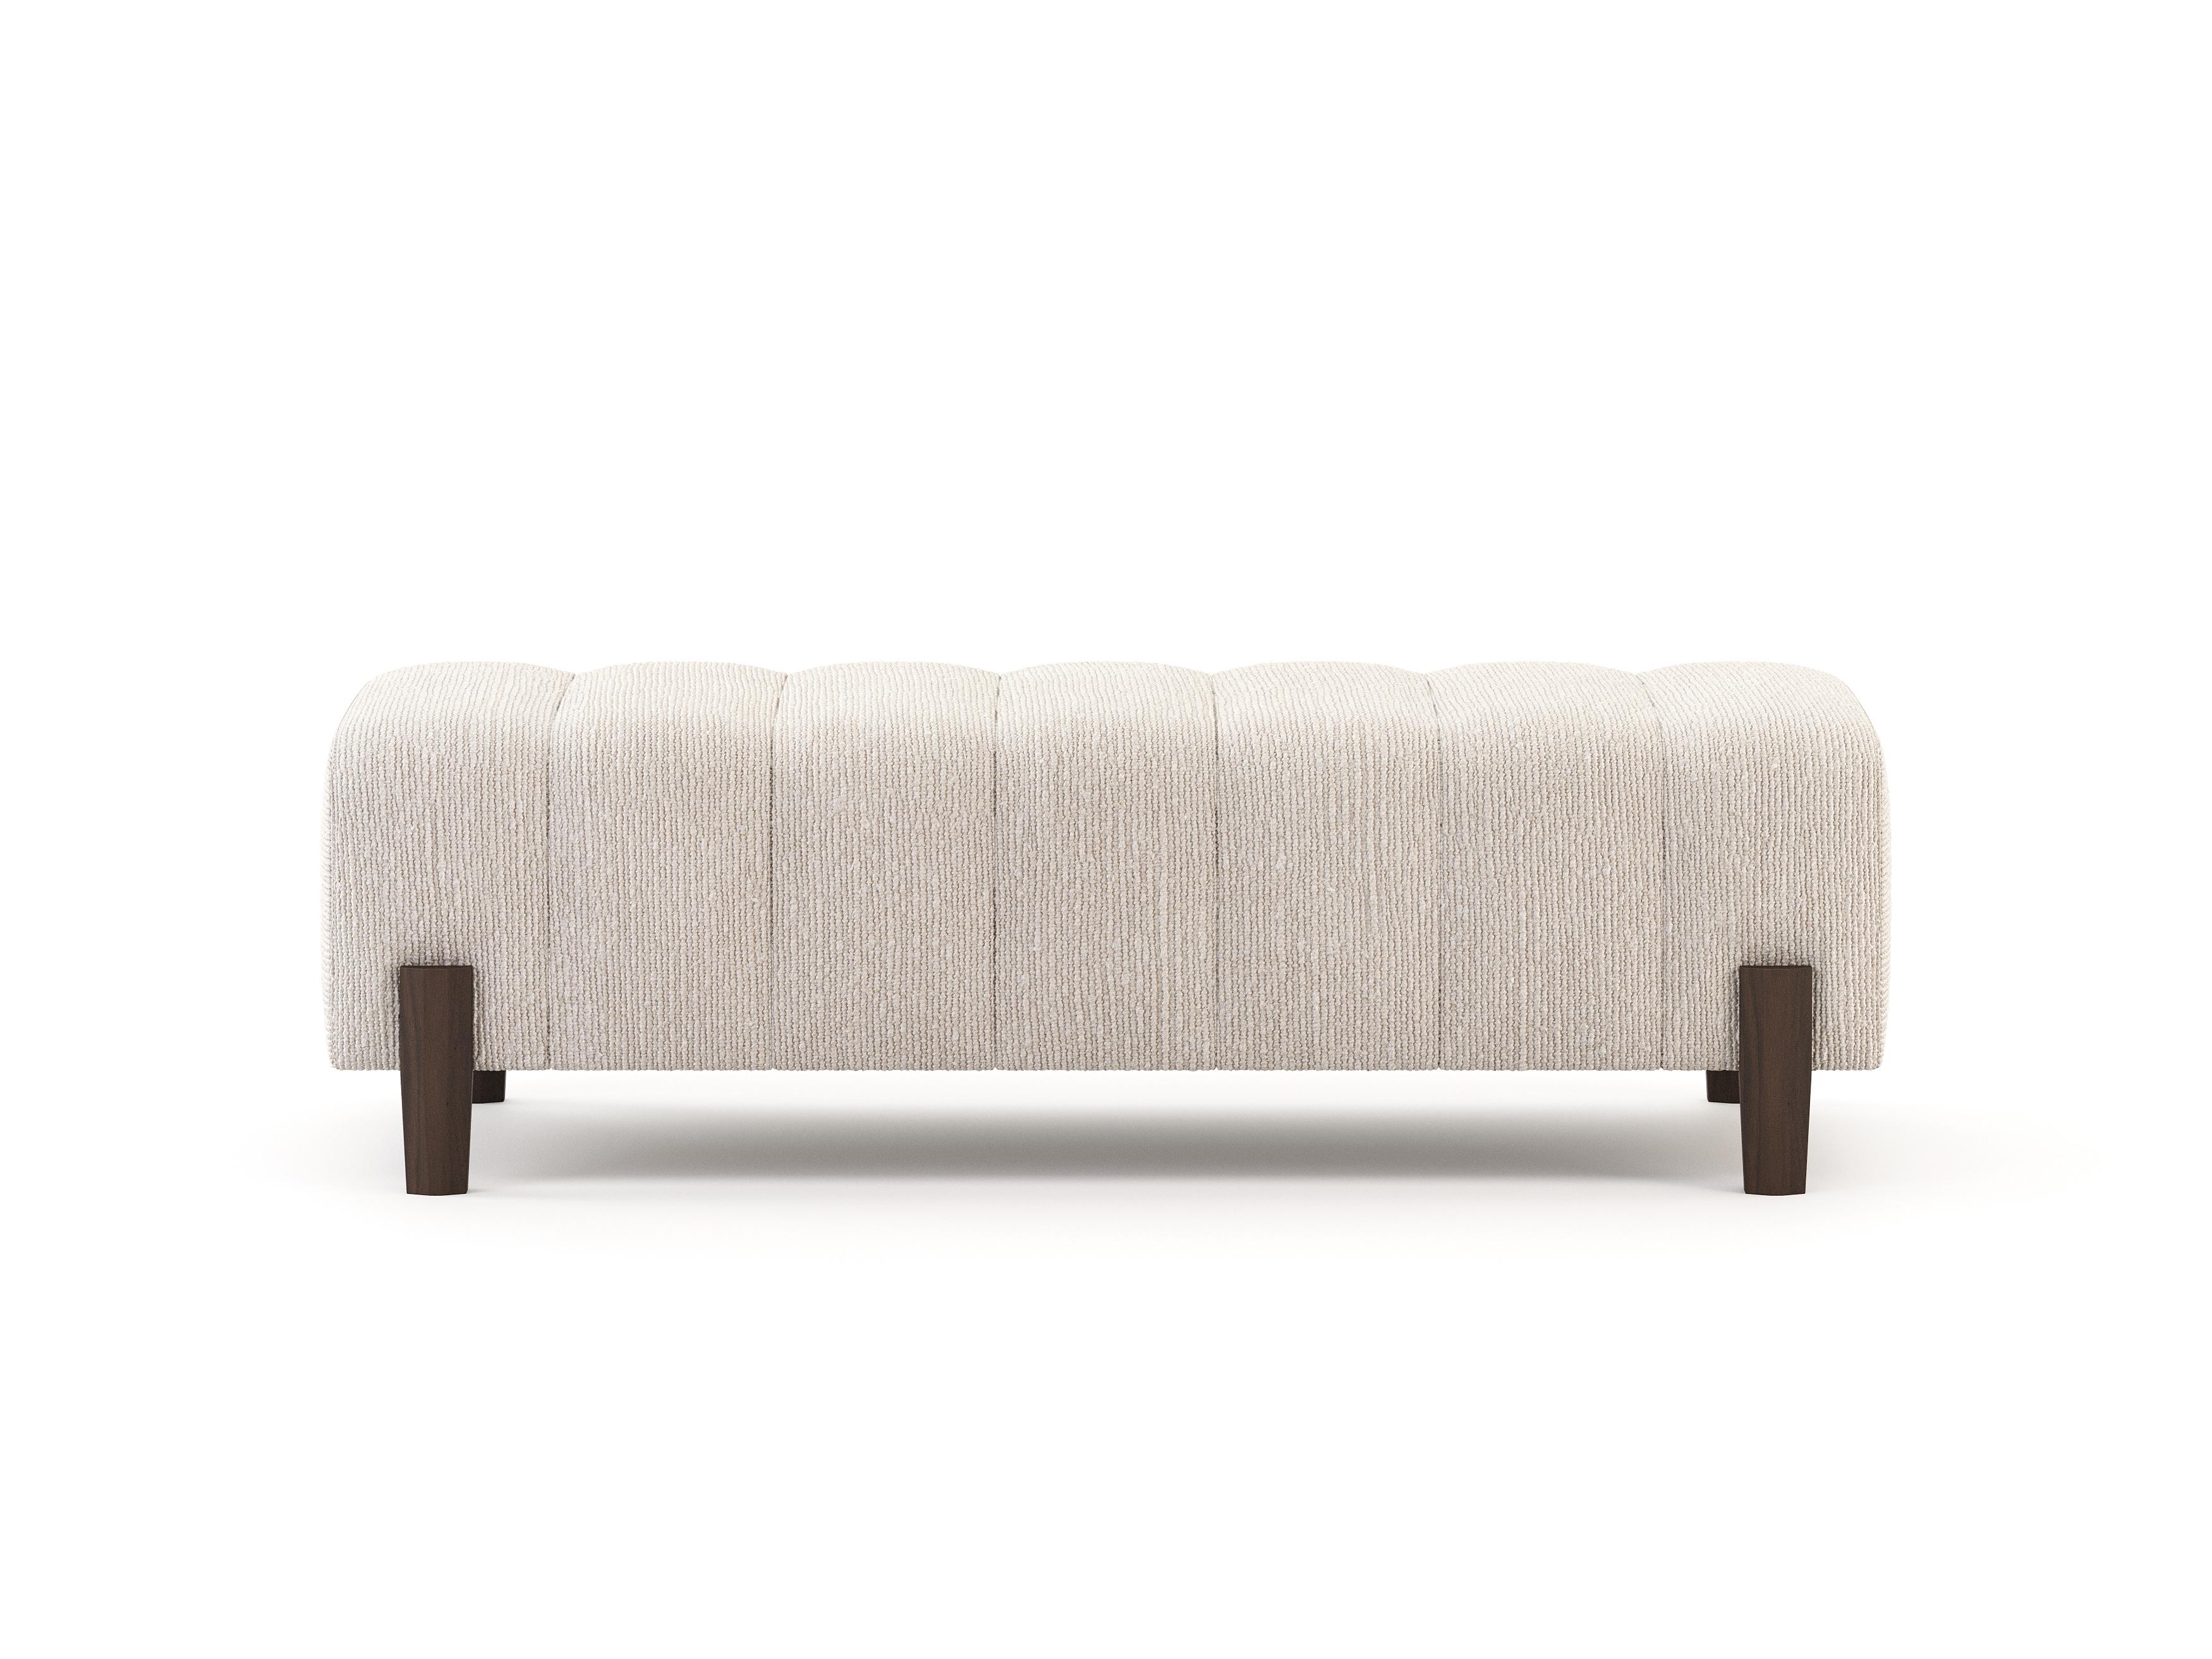 Portuguese Scandinavian Modern Terra Bench made with textile, Handmade by Stylish Club For Sale